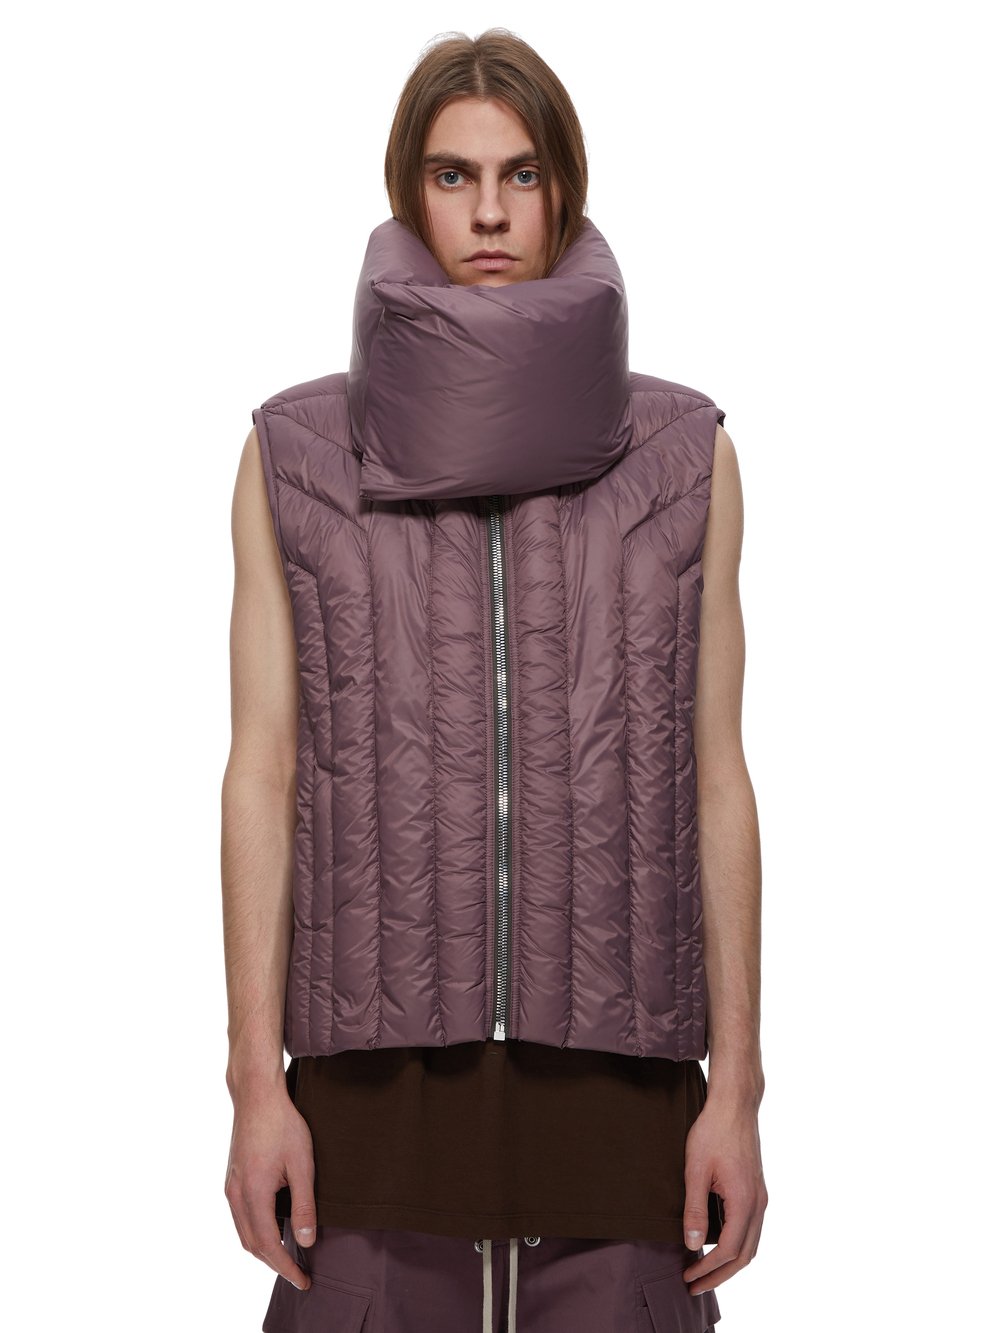 RICK OWENS FW23 LUXOR VEST LINER IN AMETHYST RECYCLED NYLON